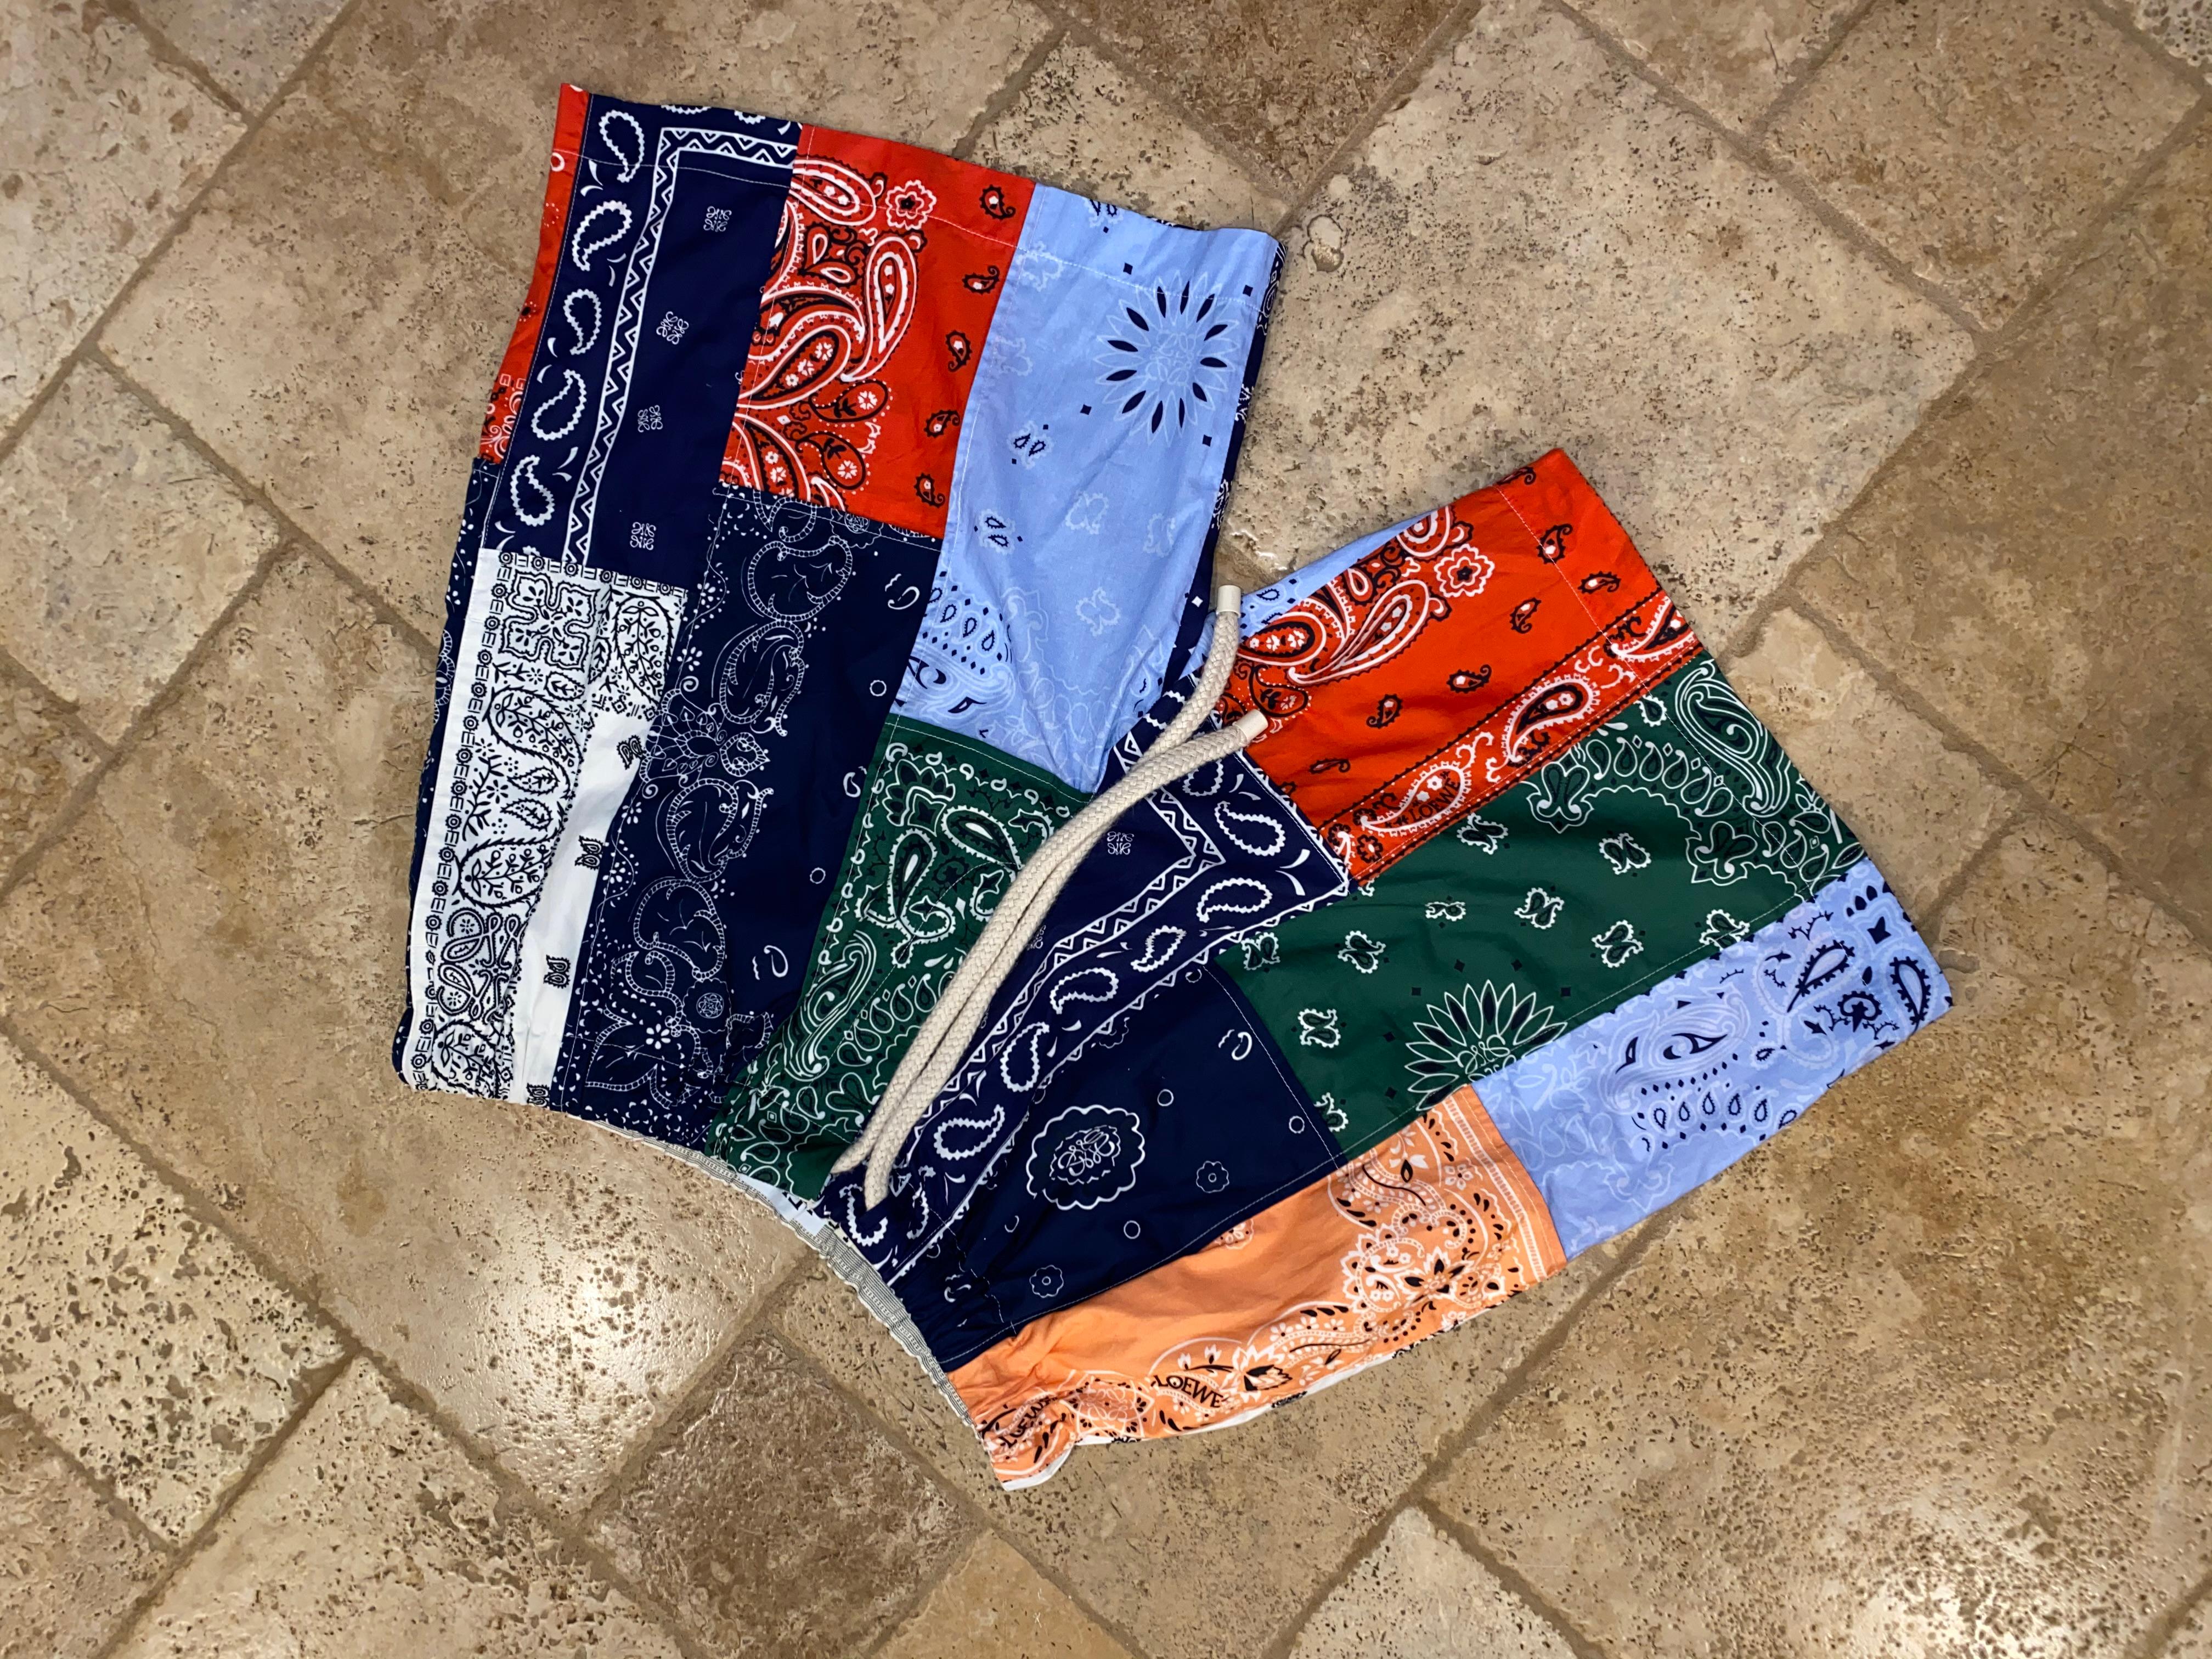 Loewe Bandana Shorts
Size M
Excellent like new condition (worn x1)
Retail was $830

All sales are final